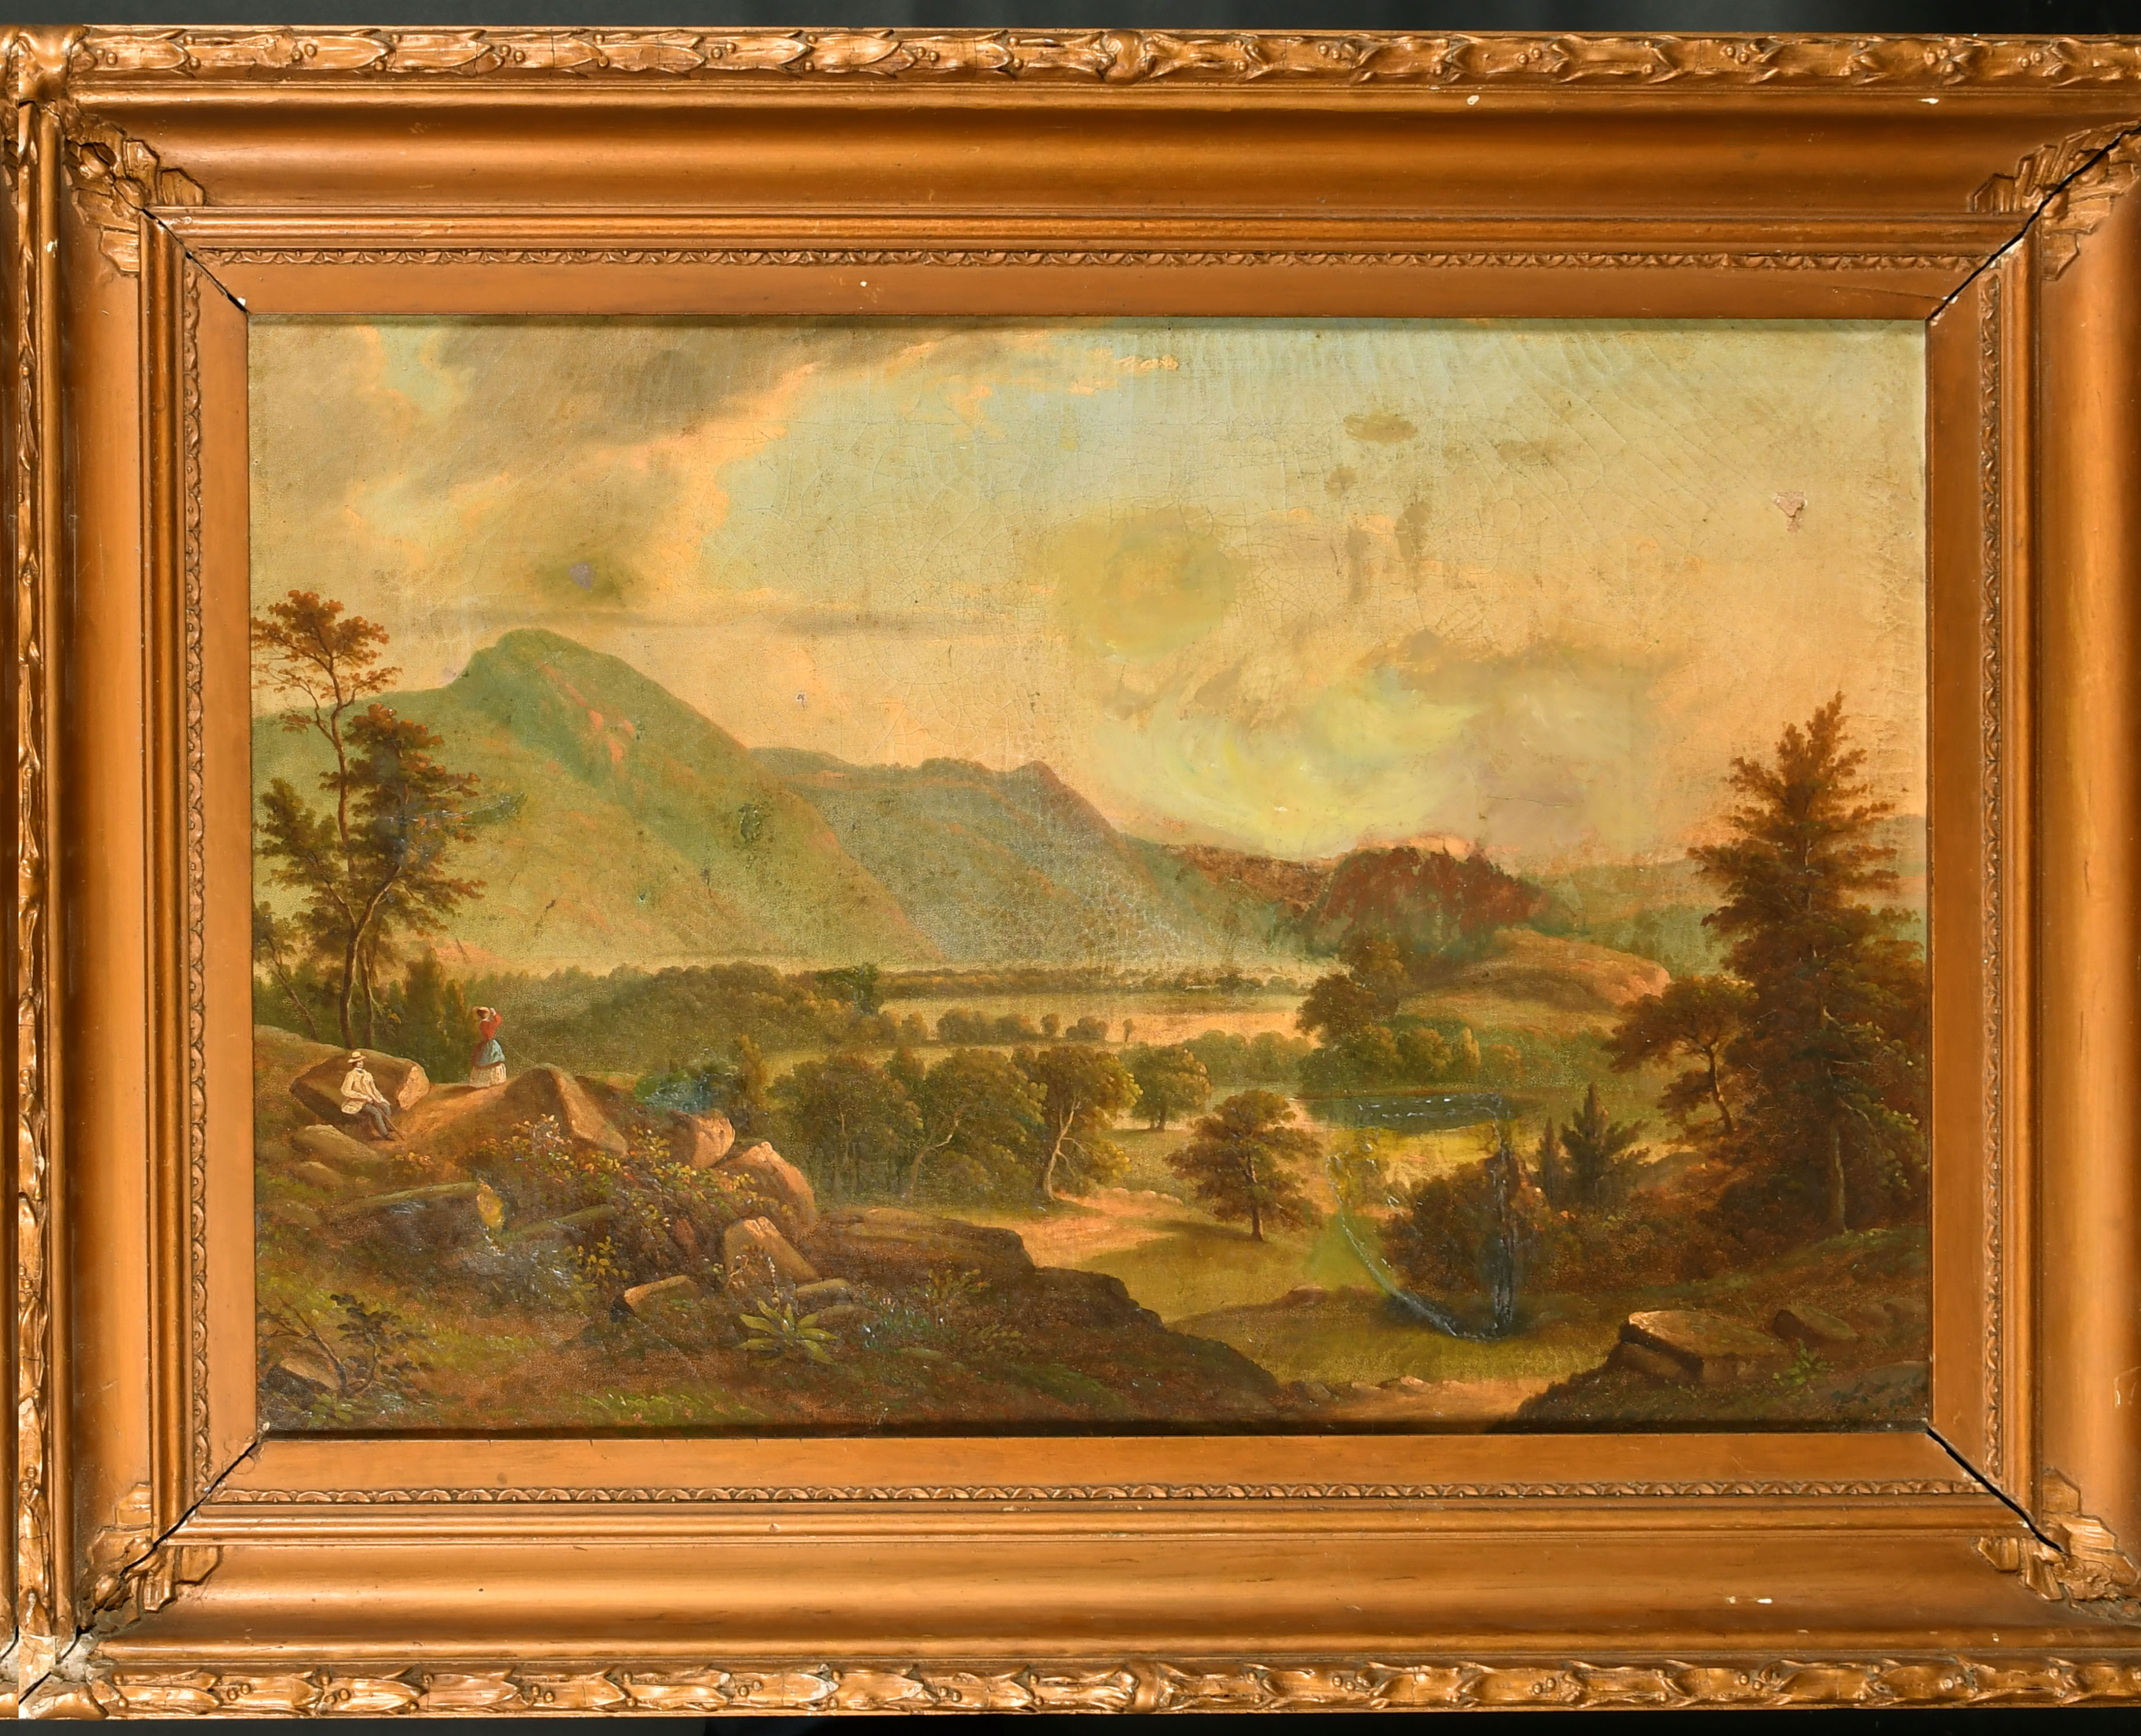 19th Century American School. Figures in a Mountainous Landscape, Oil on canvas, Inscribed on labels - Image 2 of 4